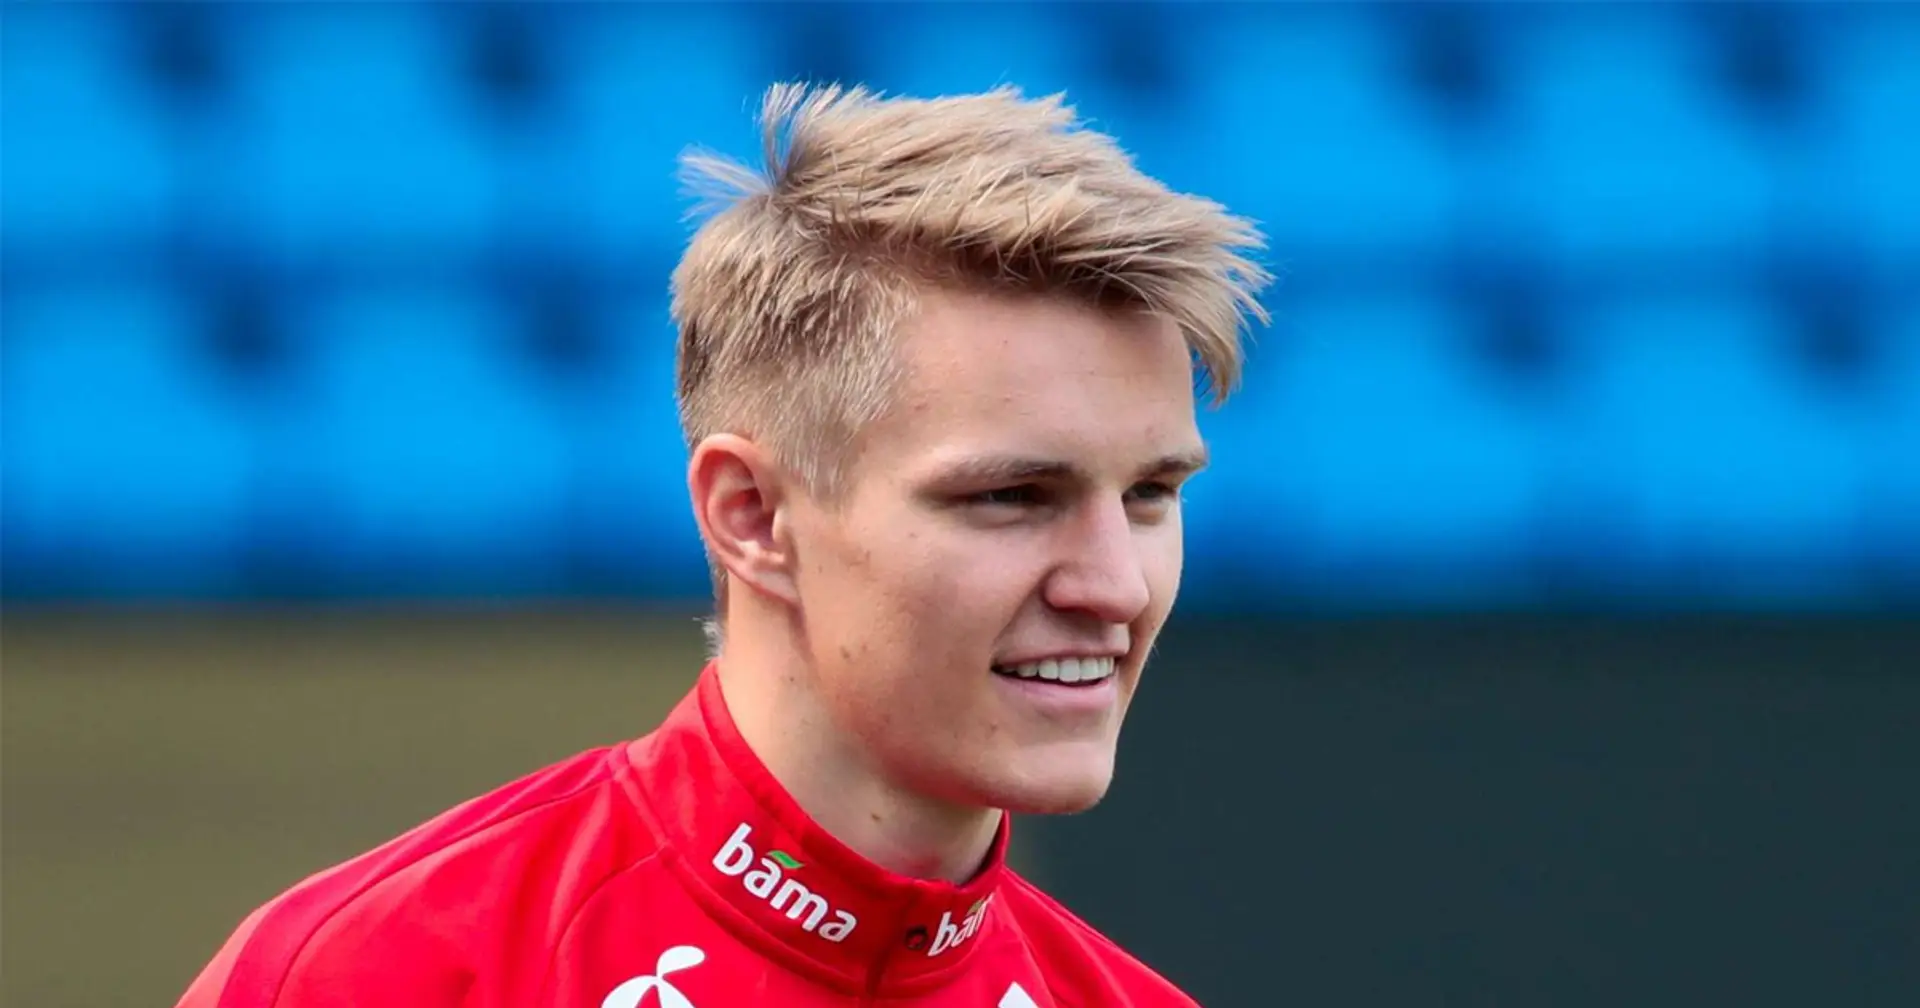 OFFICIAL: Martin Odegaard joins Arsenal on loan